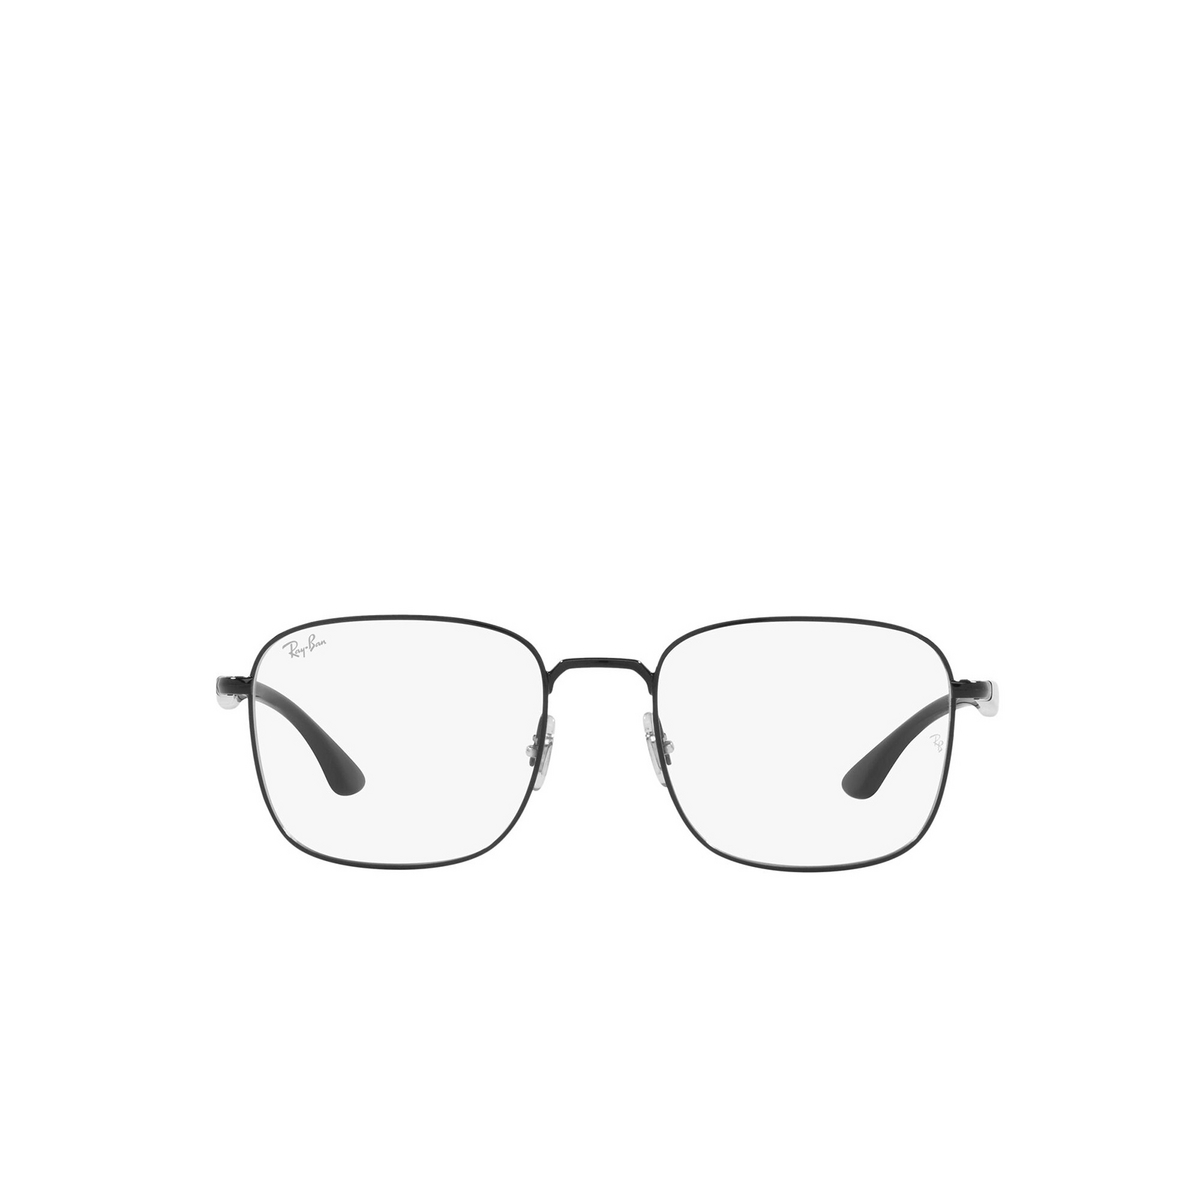 Ray-Ban® Square Eyeglasses: RX6469 color Black 2509 - front view.